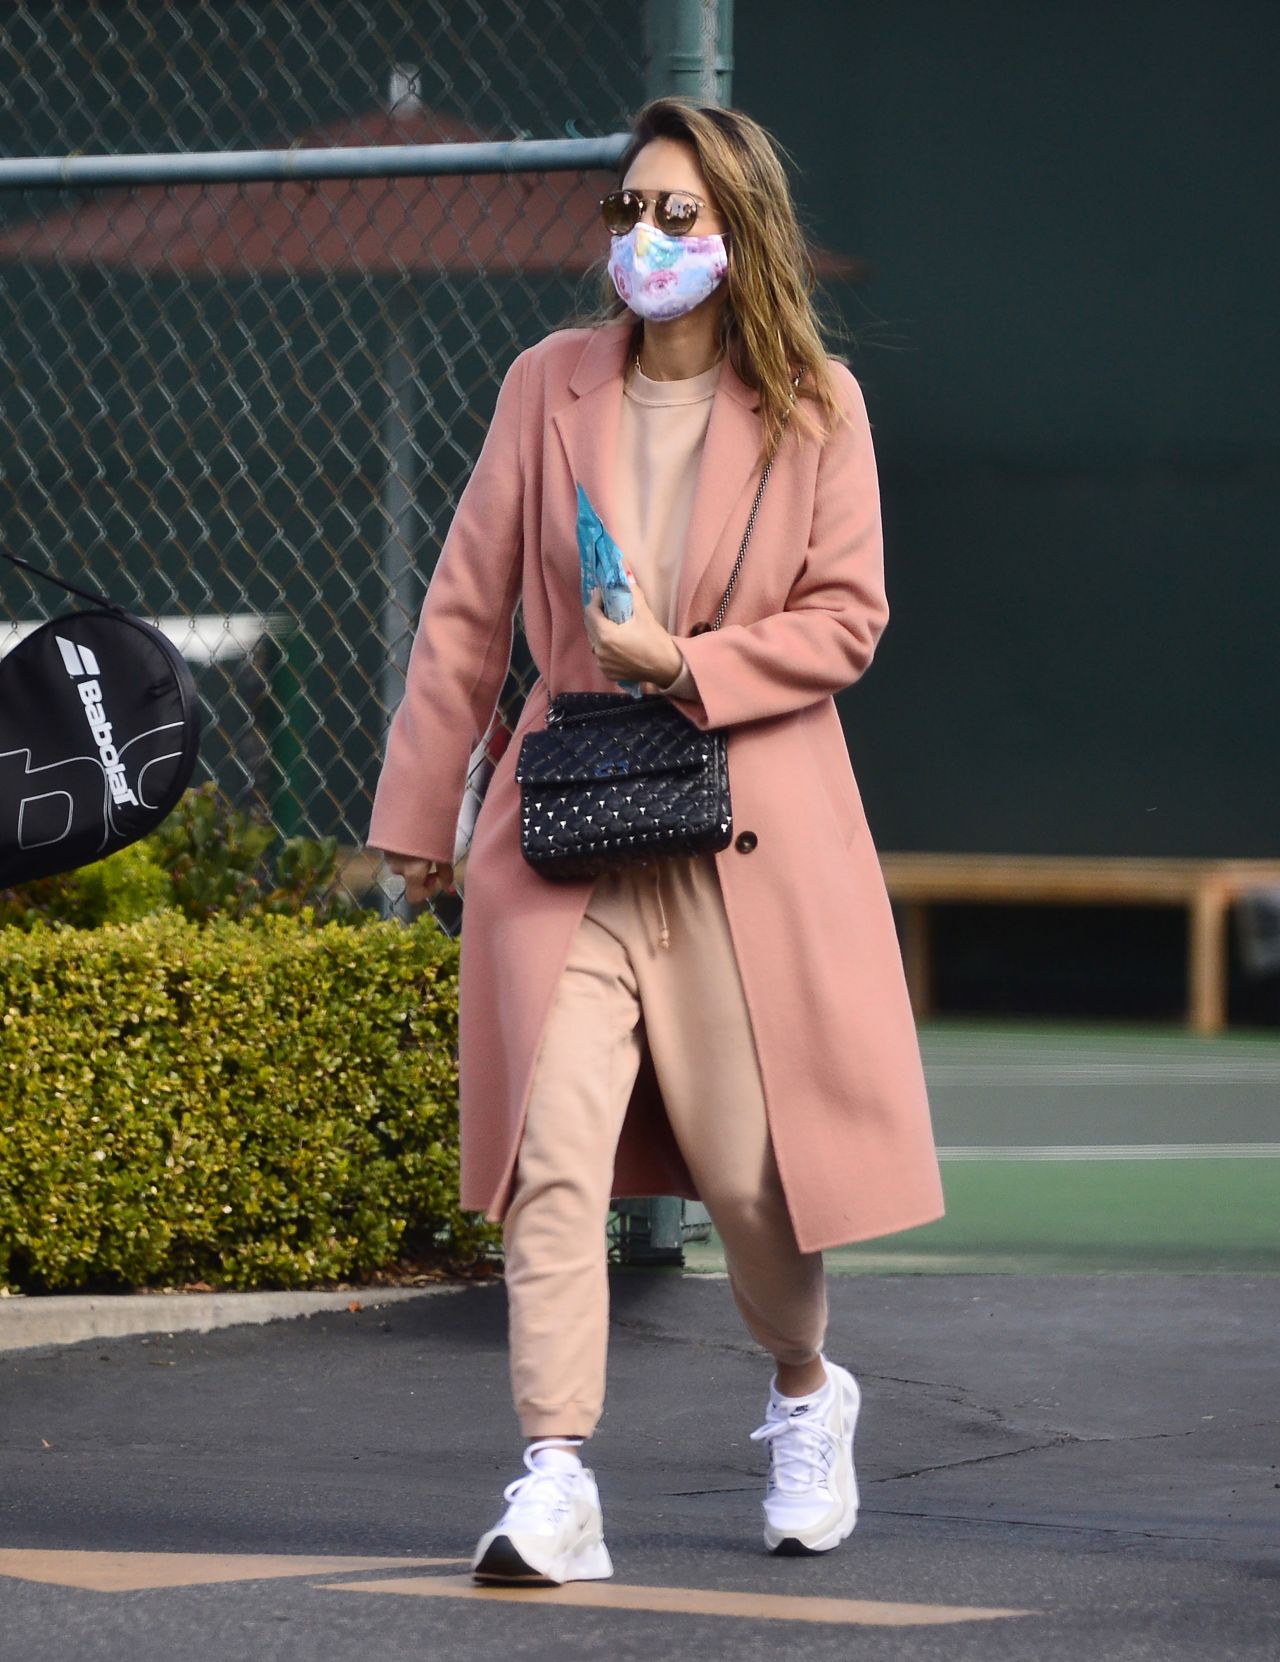 Jessica Alba Leaving A Tennis Lesson In La 11 08 2020 Celebmafia Her sassy avatar and dazzling looks perfectly compliment her curvy body and flawless skin. jessica alba leaving a tennis lesson